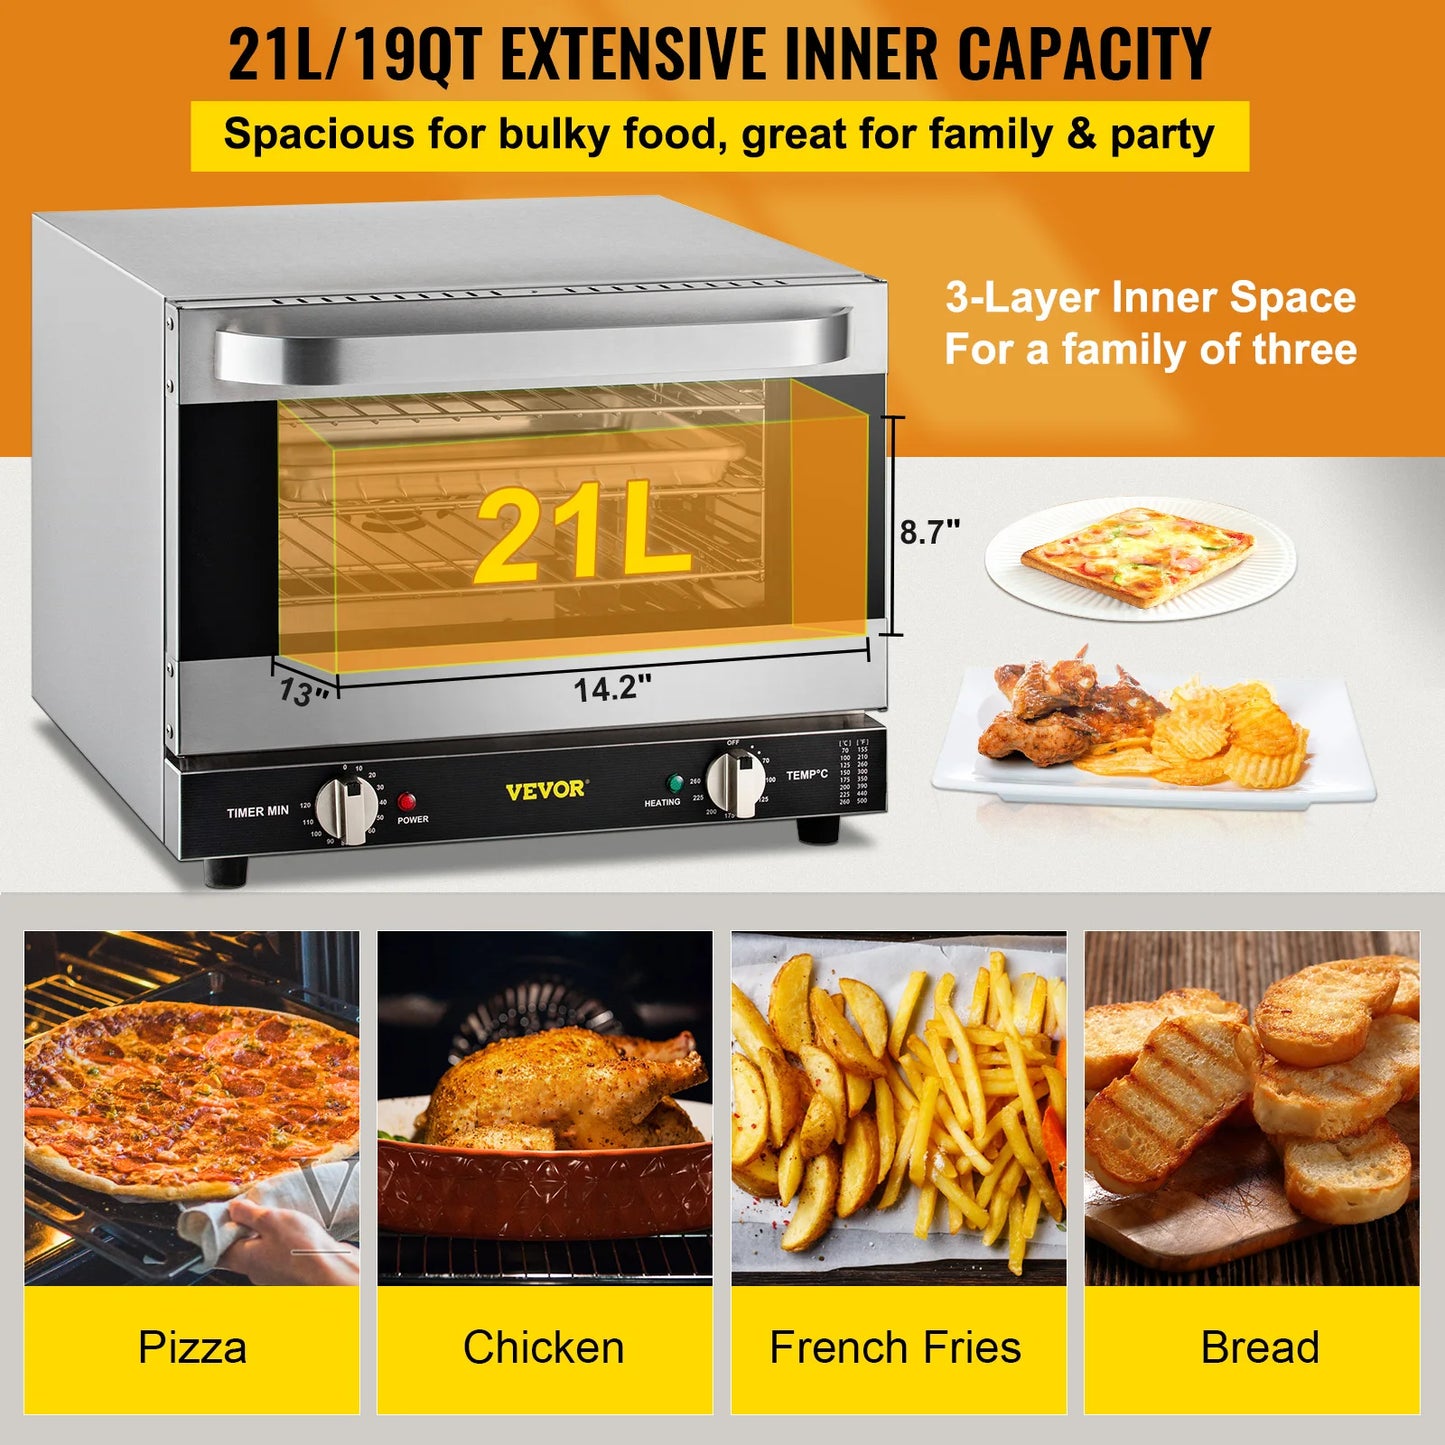 VEVOR Electric Oven - Commercial Multifunction Countertop, Available in 21L, 47L, 66L with 3/4-Layer Baking Machine Options for Home Use, Toaster, Pizza, and Convection Oven